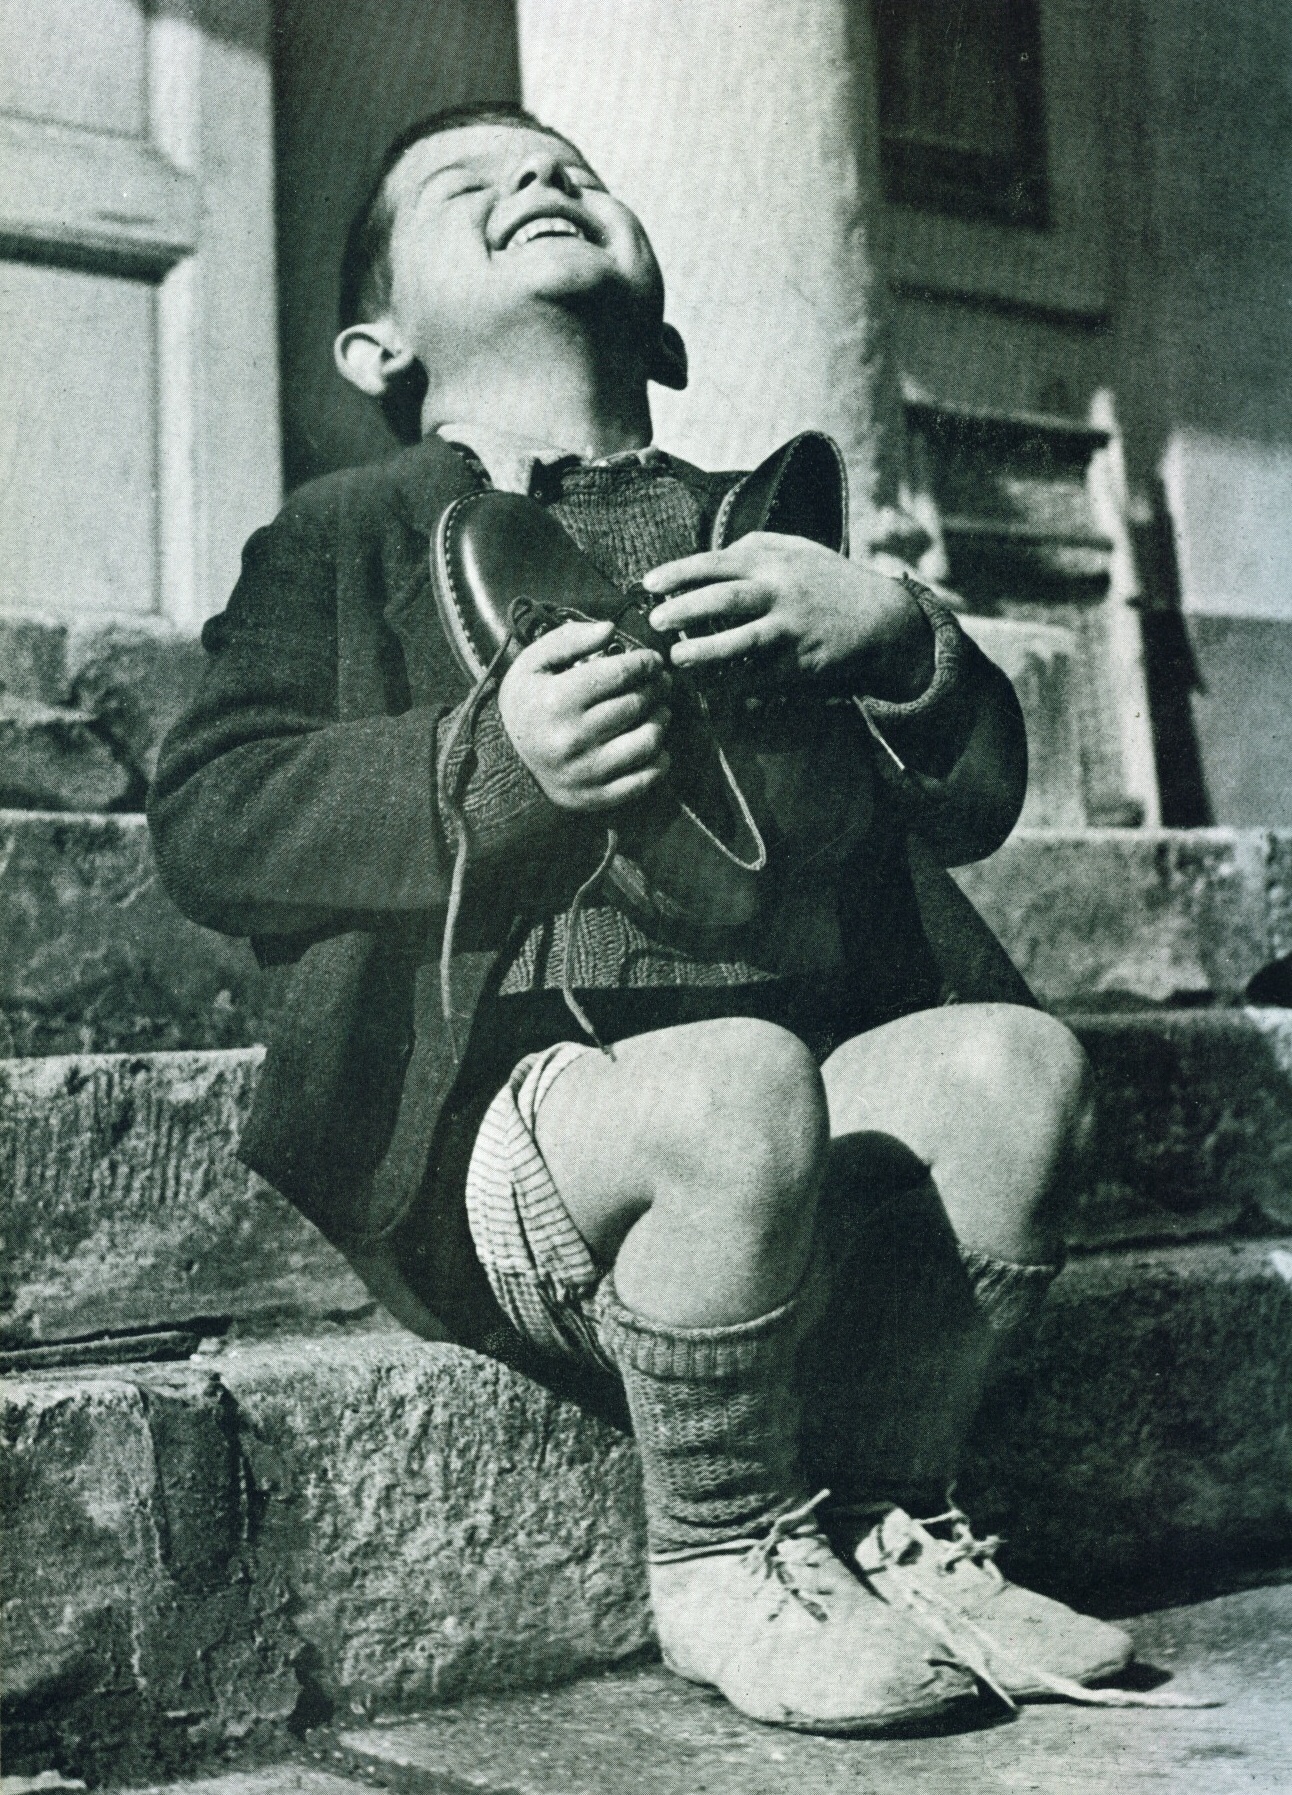 A 6 year-old boy, living in an orphanage in Austria rejoices and hugs a new pair of shoes given to him by the American Red Cross. 1946